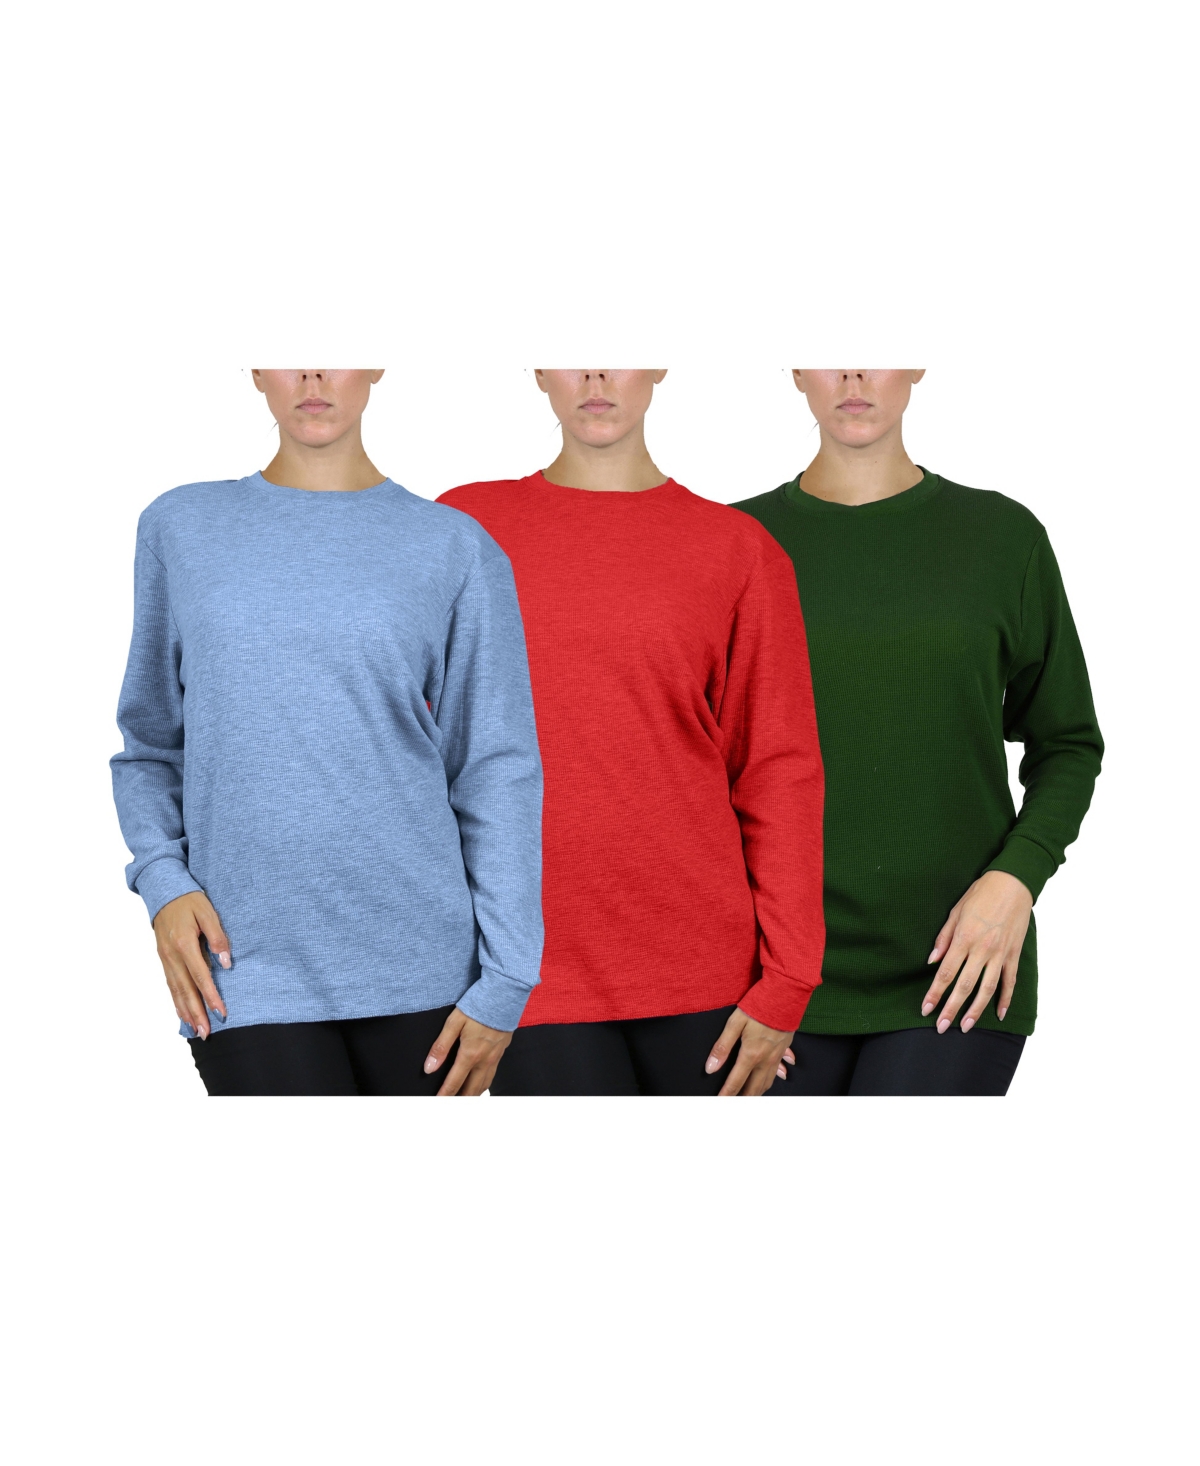 Shop Galaxy By Harvic Women's Loose Fit Waffle Knit Thermal Shirt, Pack Of 3 In Heather Medium Blue,red,olive